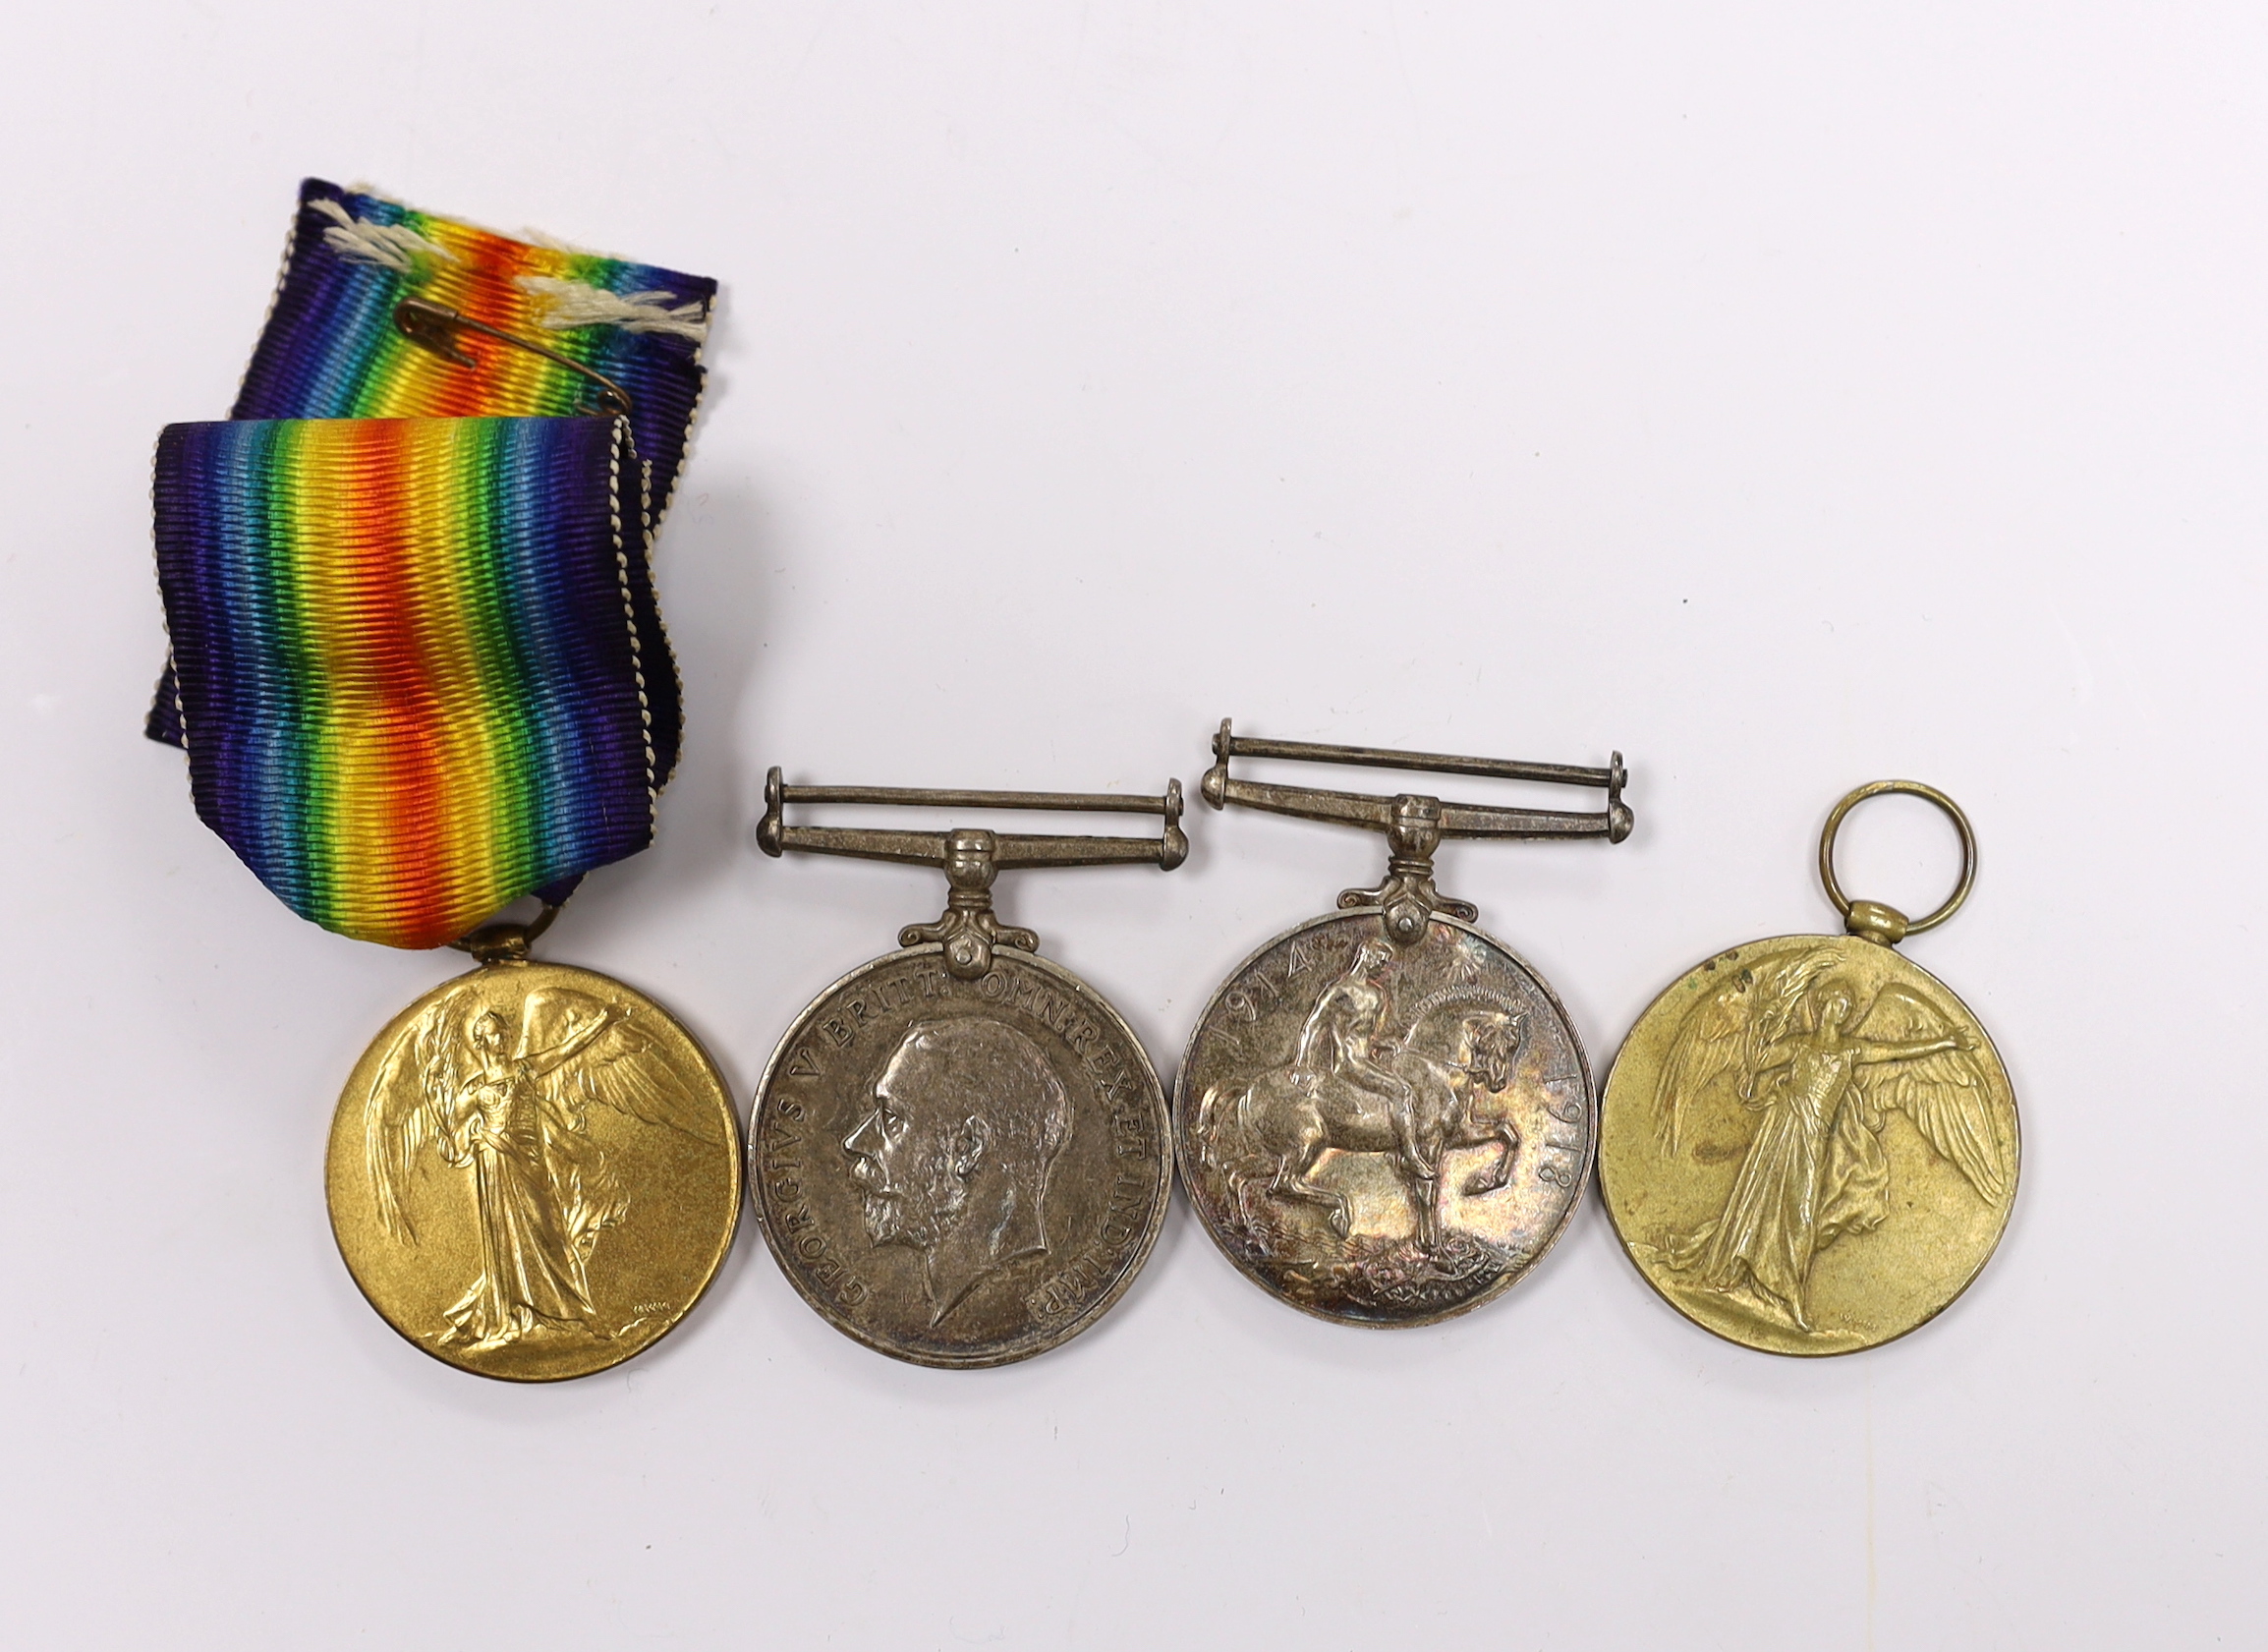 Two pairs of First World War campaign medals, both comprising the War Medal and Victory Medal; to Cpl. H.G. Margerson R.A. And Pte. F.E. Walker E.R. of York V.